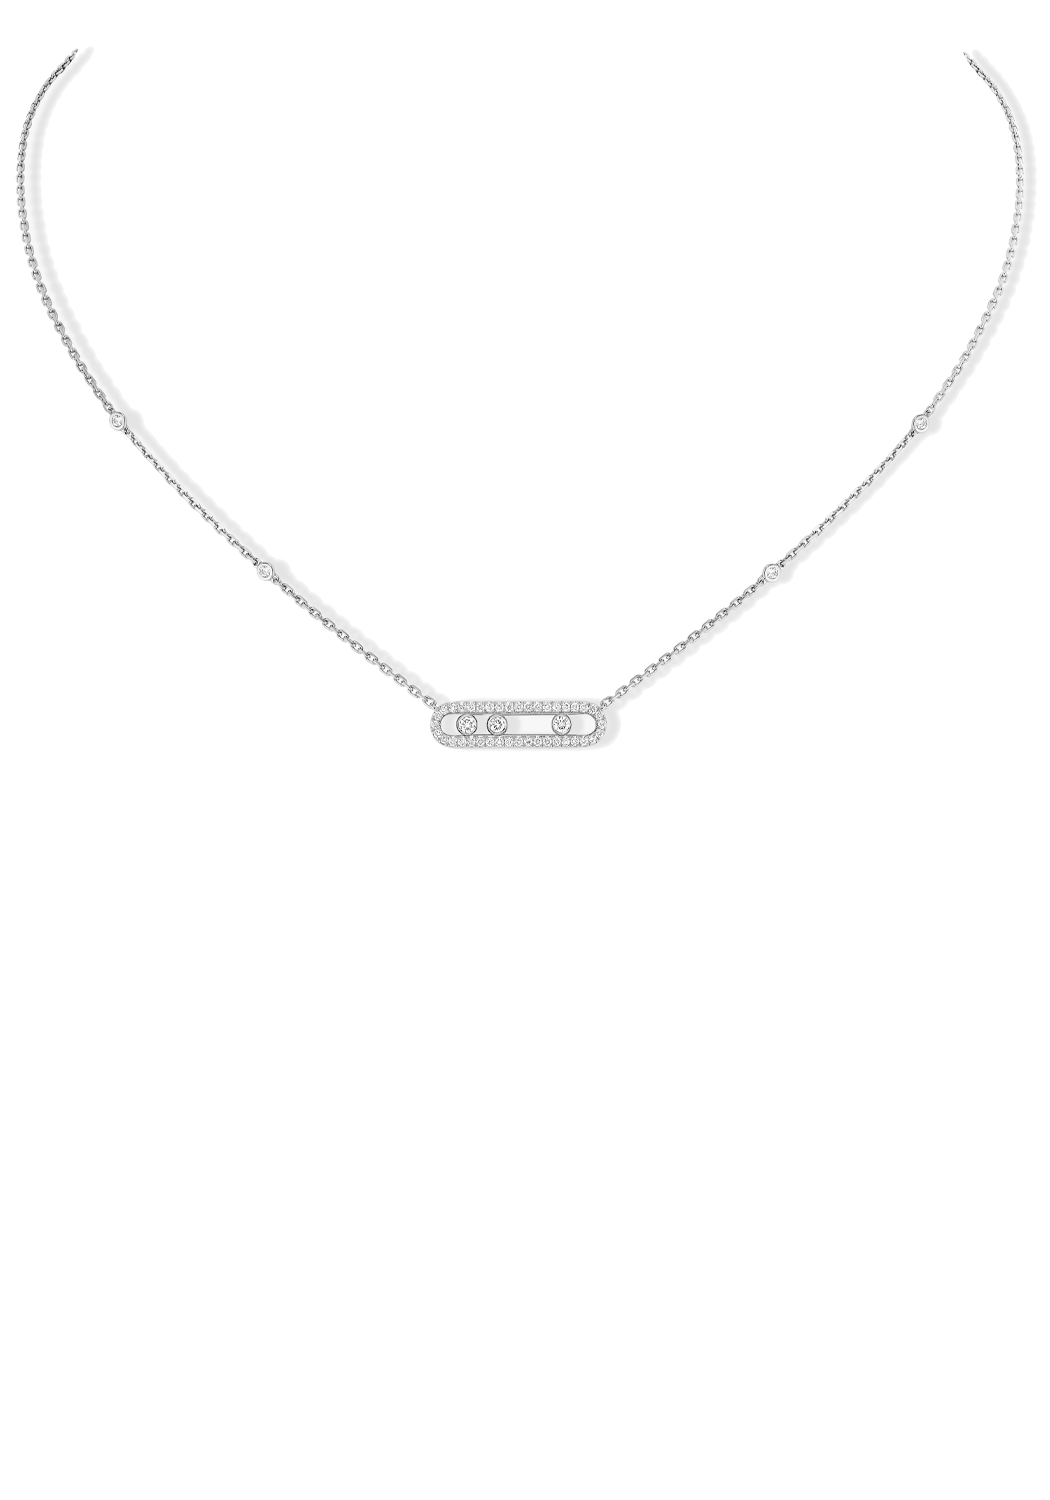 Messika Baby Move Pave 18KWG Diamond Necklace | Ref. 04322-WG | OsterJewelers.com